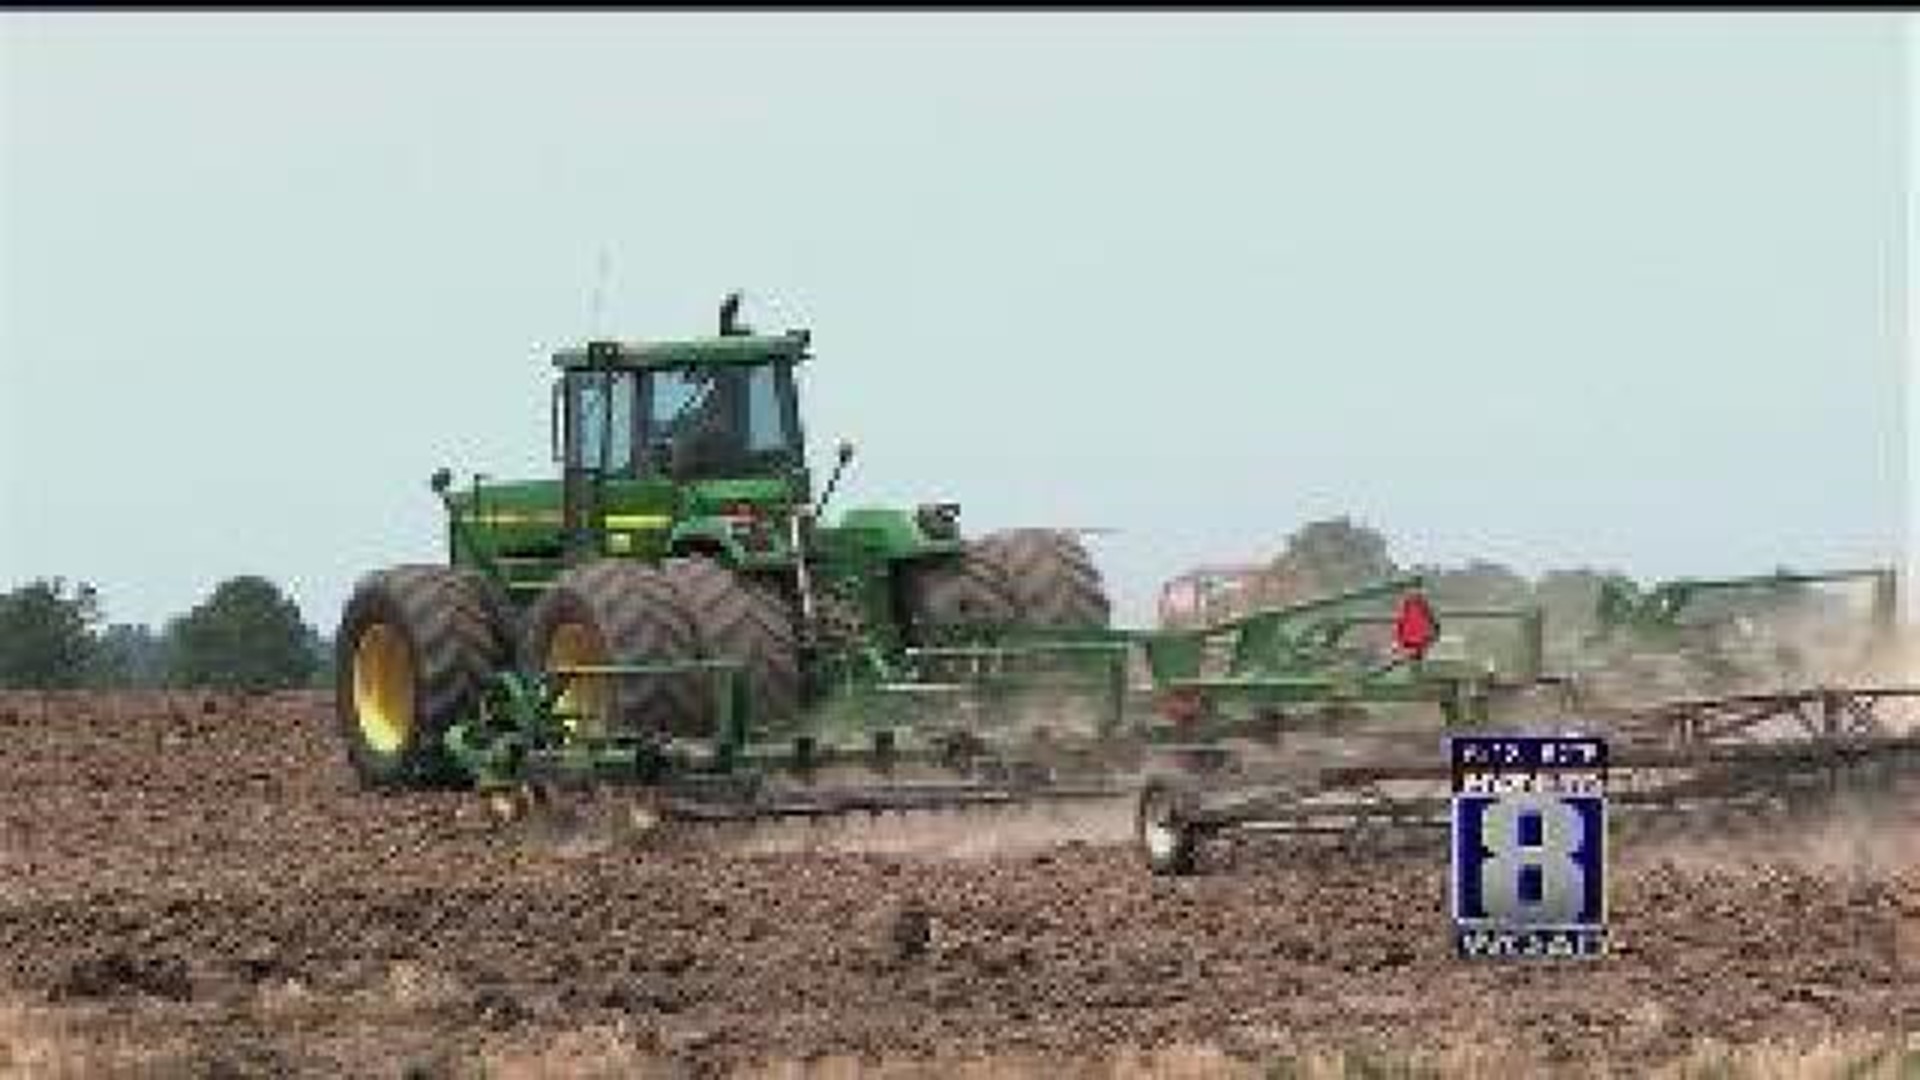 Ag in the AM: Runoff Worries